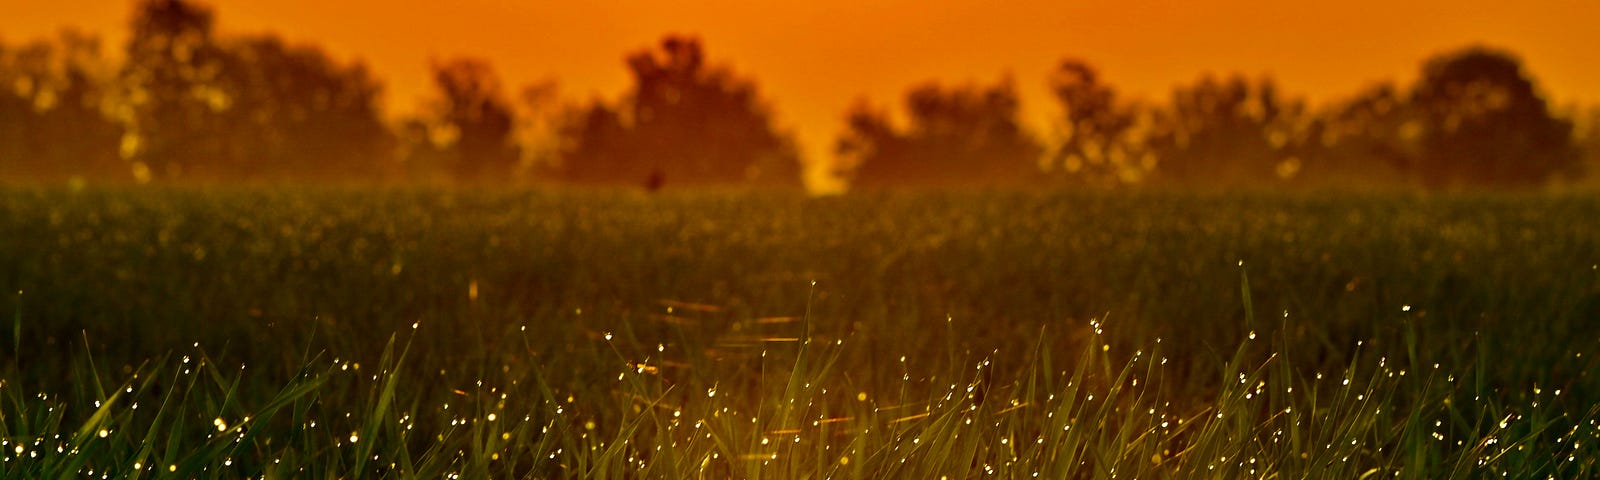 Firefly’s in a field of long grass with an orange sunset in the background